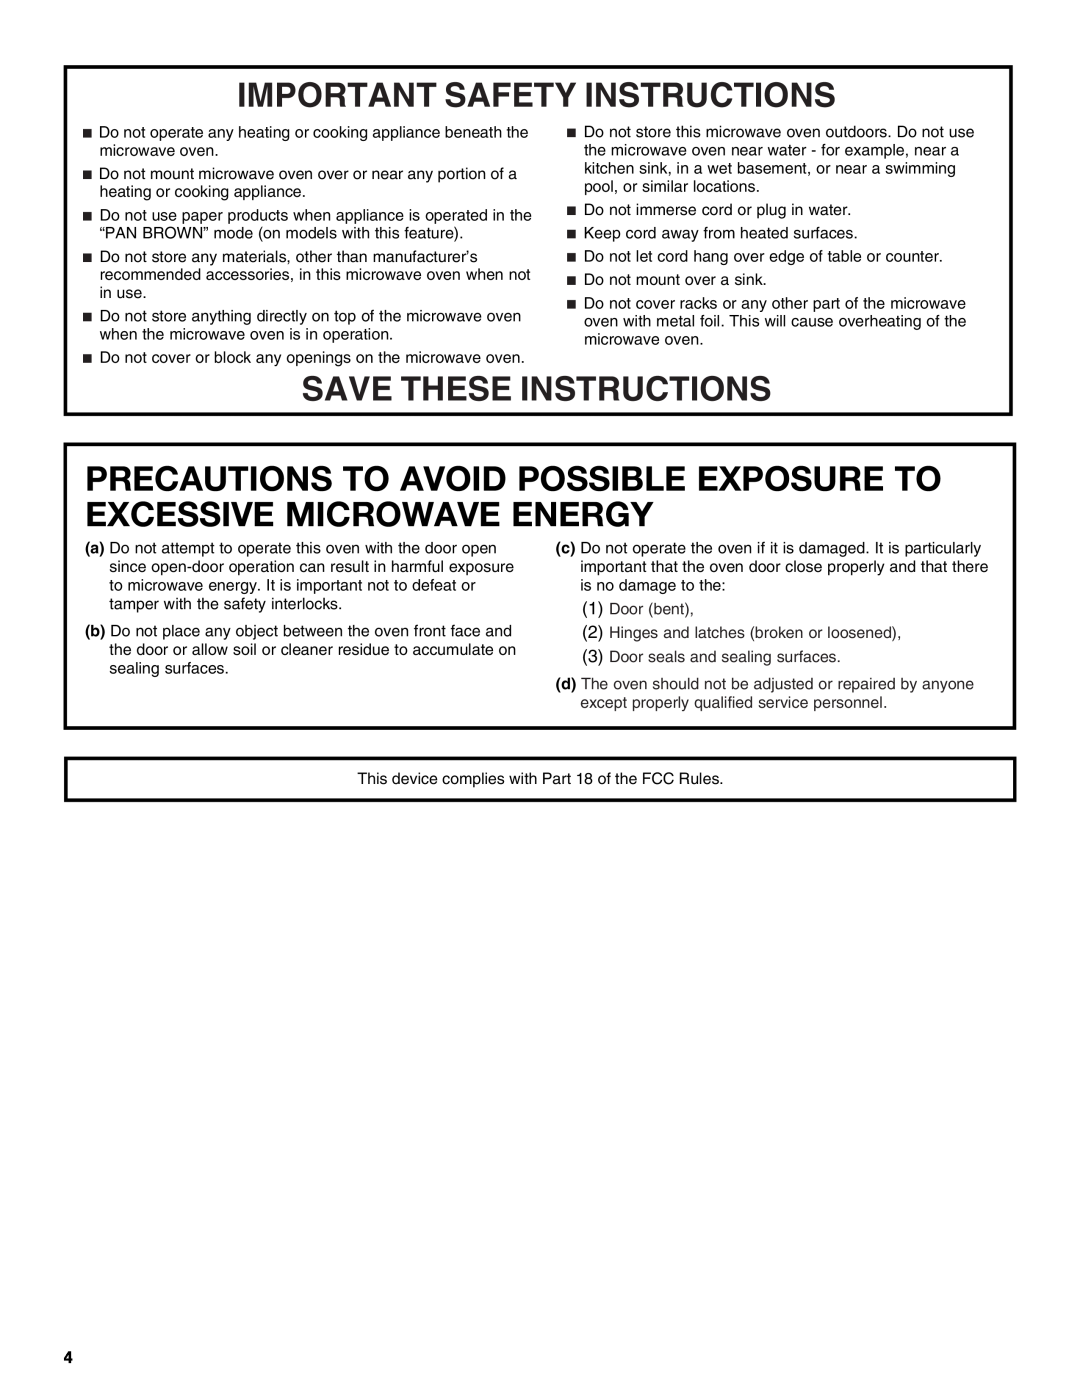 Amana AMC7159TA manual Precautions To Avoid Possible Exposure To Excessive Microwave Energy, Important Safety Instructions 